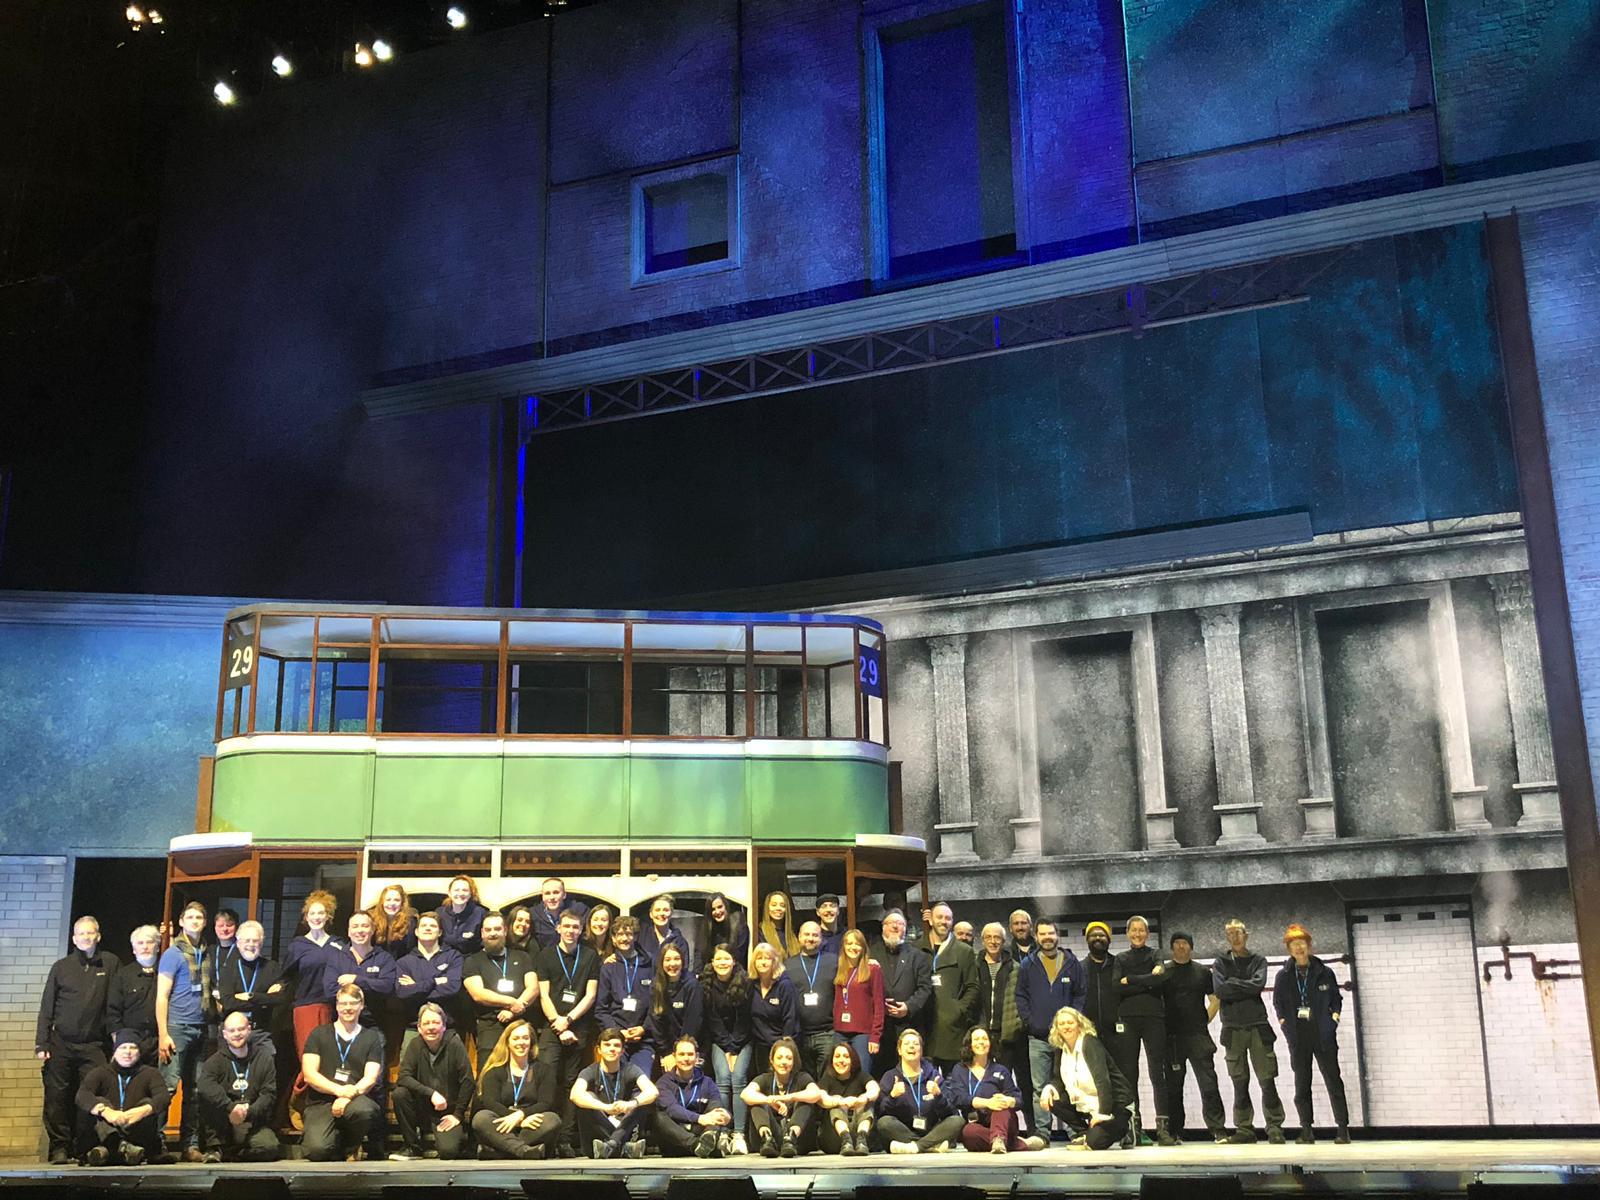 The Steamie cast and crew